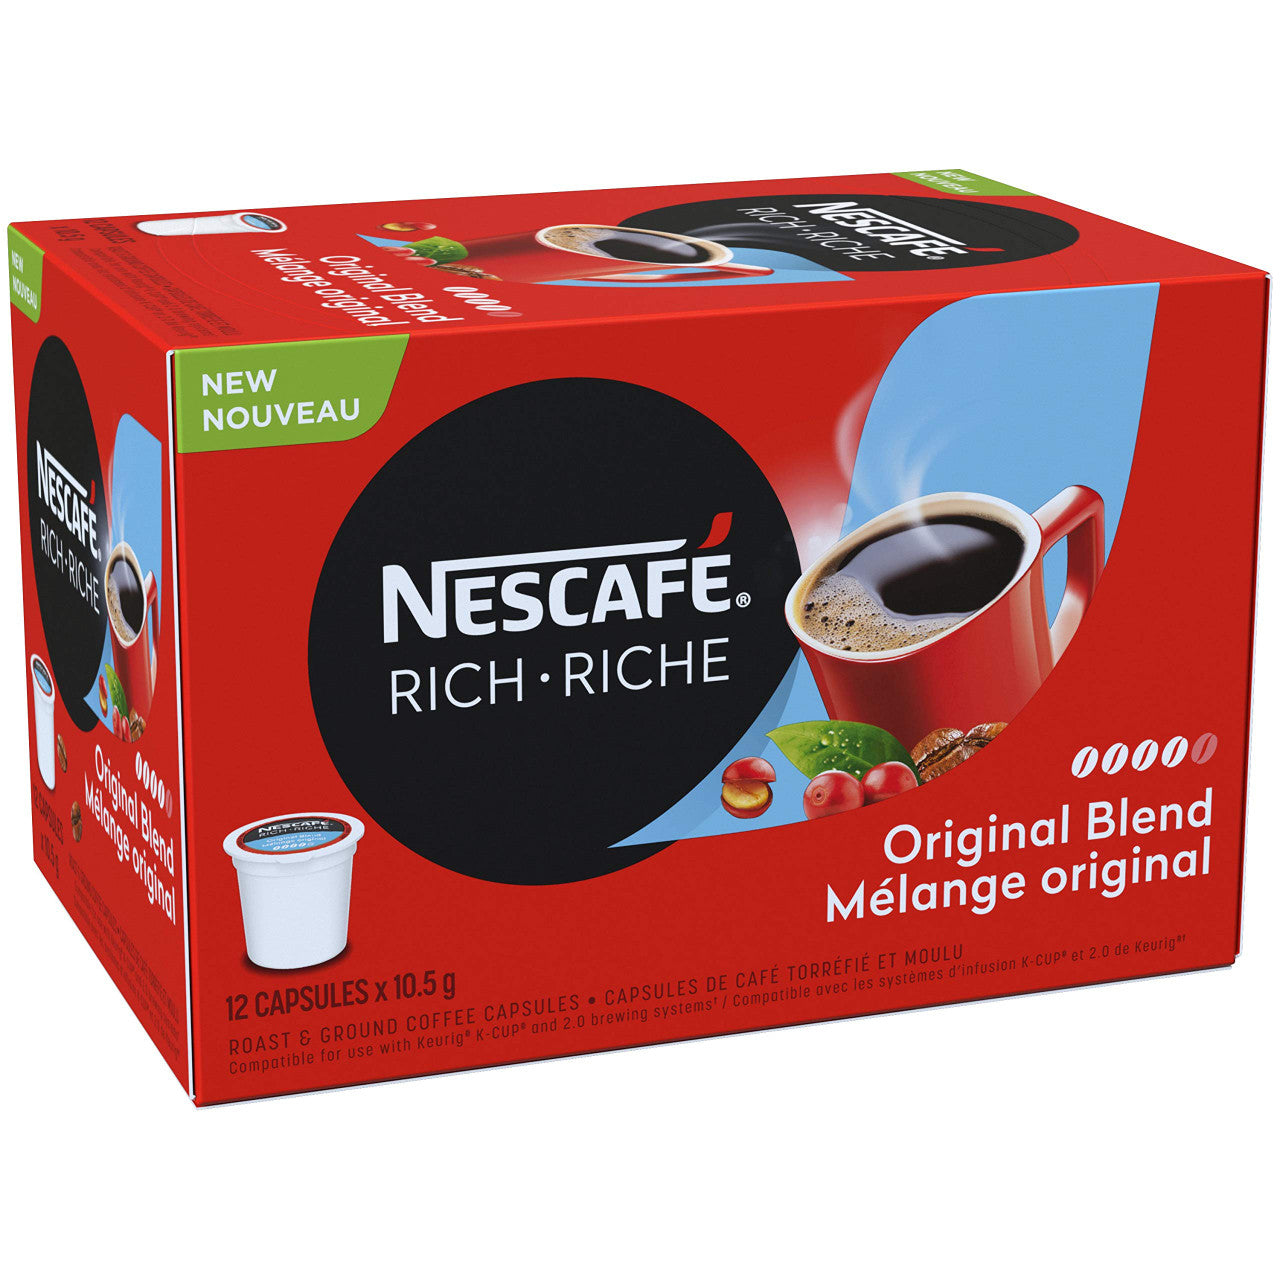 Nescafe Rich Original Coffee Capsules, 12 x 10.5g, (Imported from Canada)